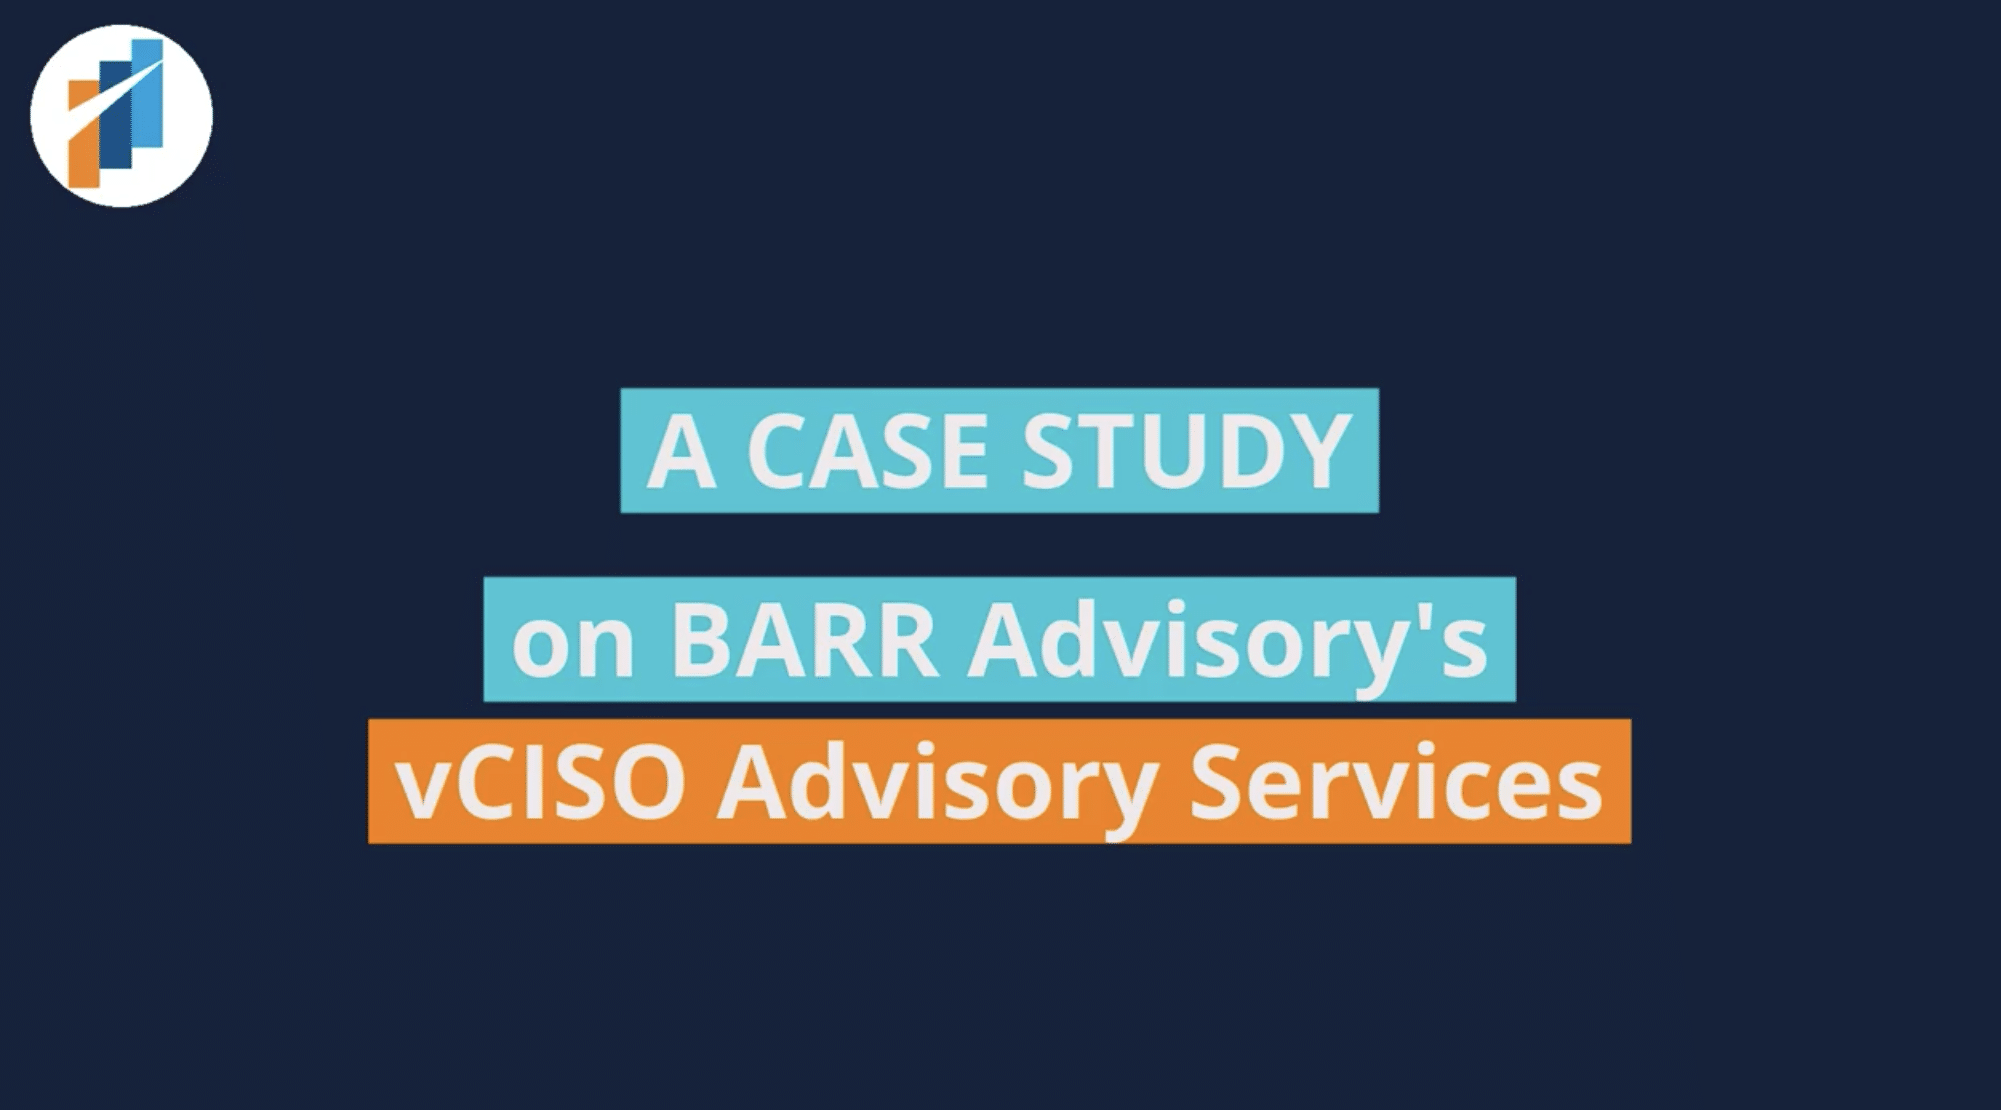 vCISO Advisory Services Lead to Ceros SOC 2, ISO Audit, and 200+ Closed Deals